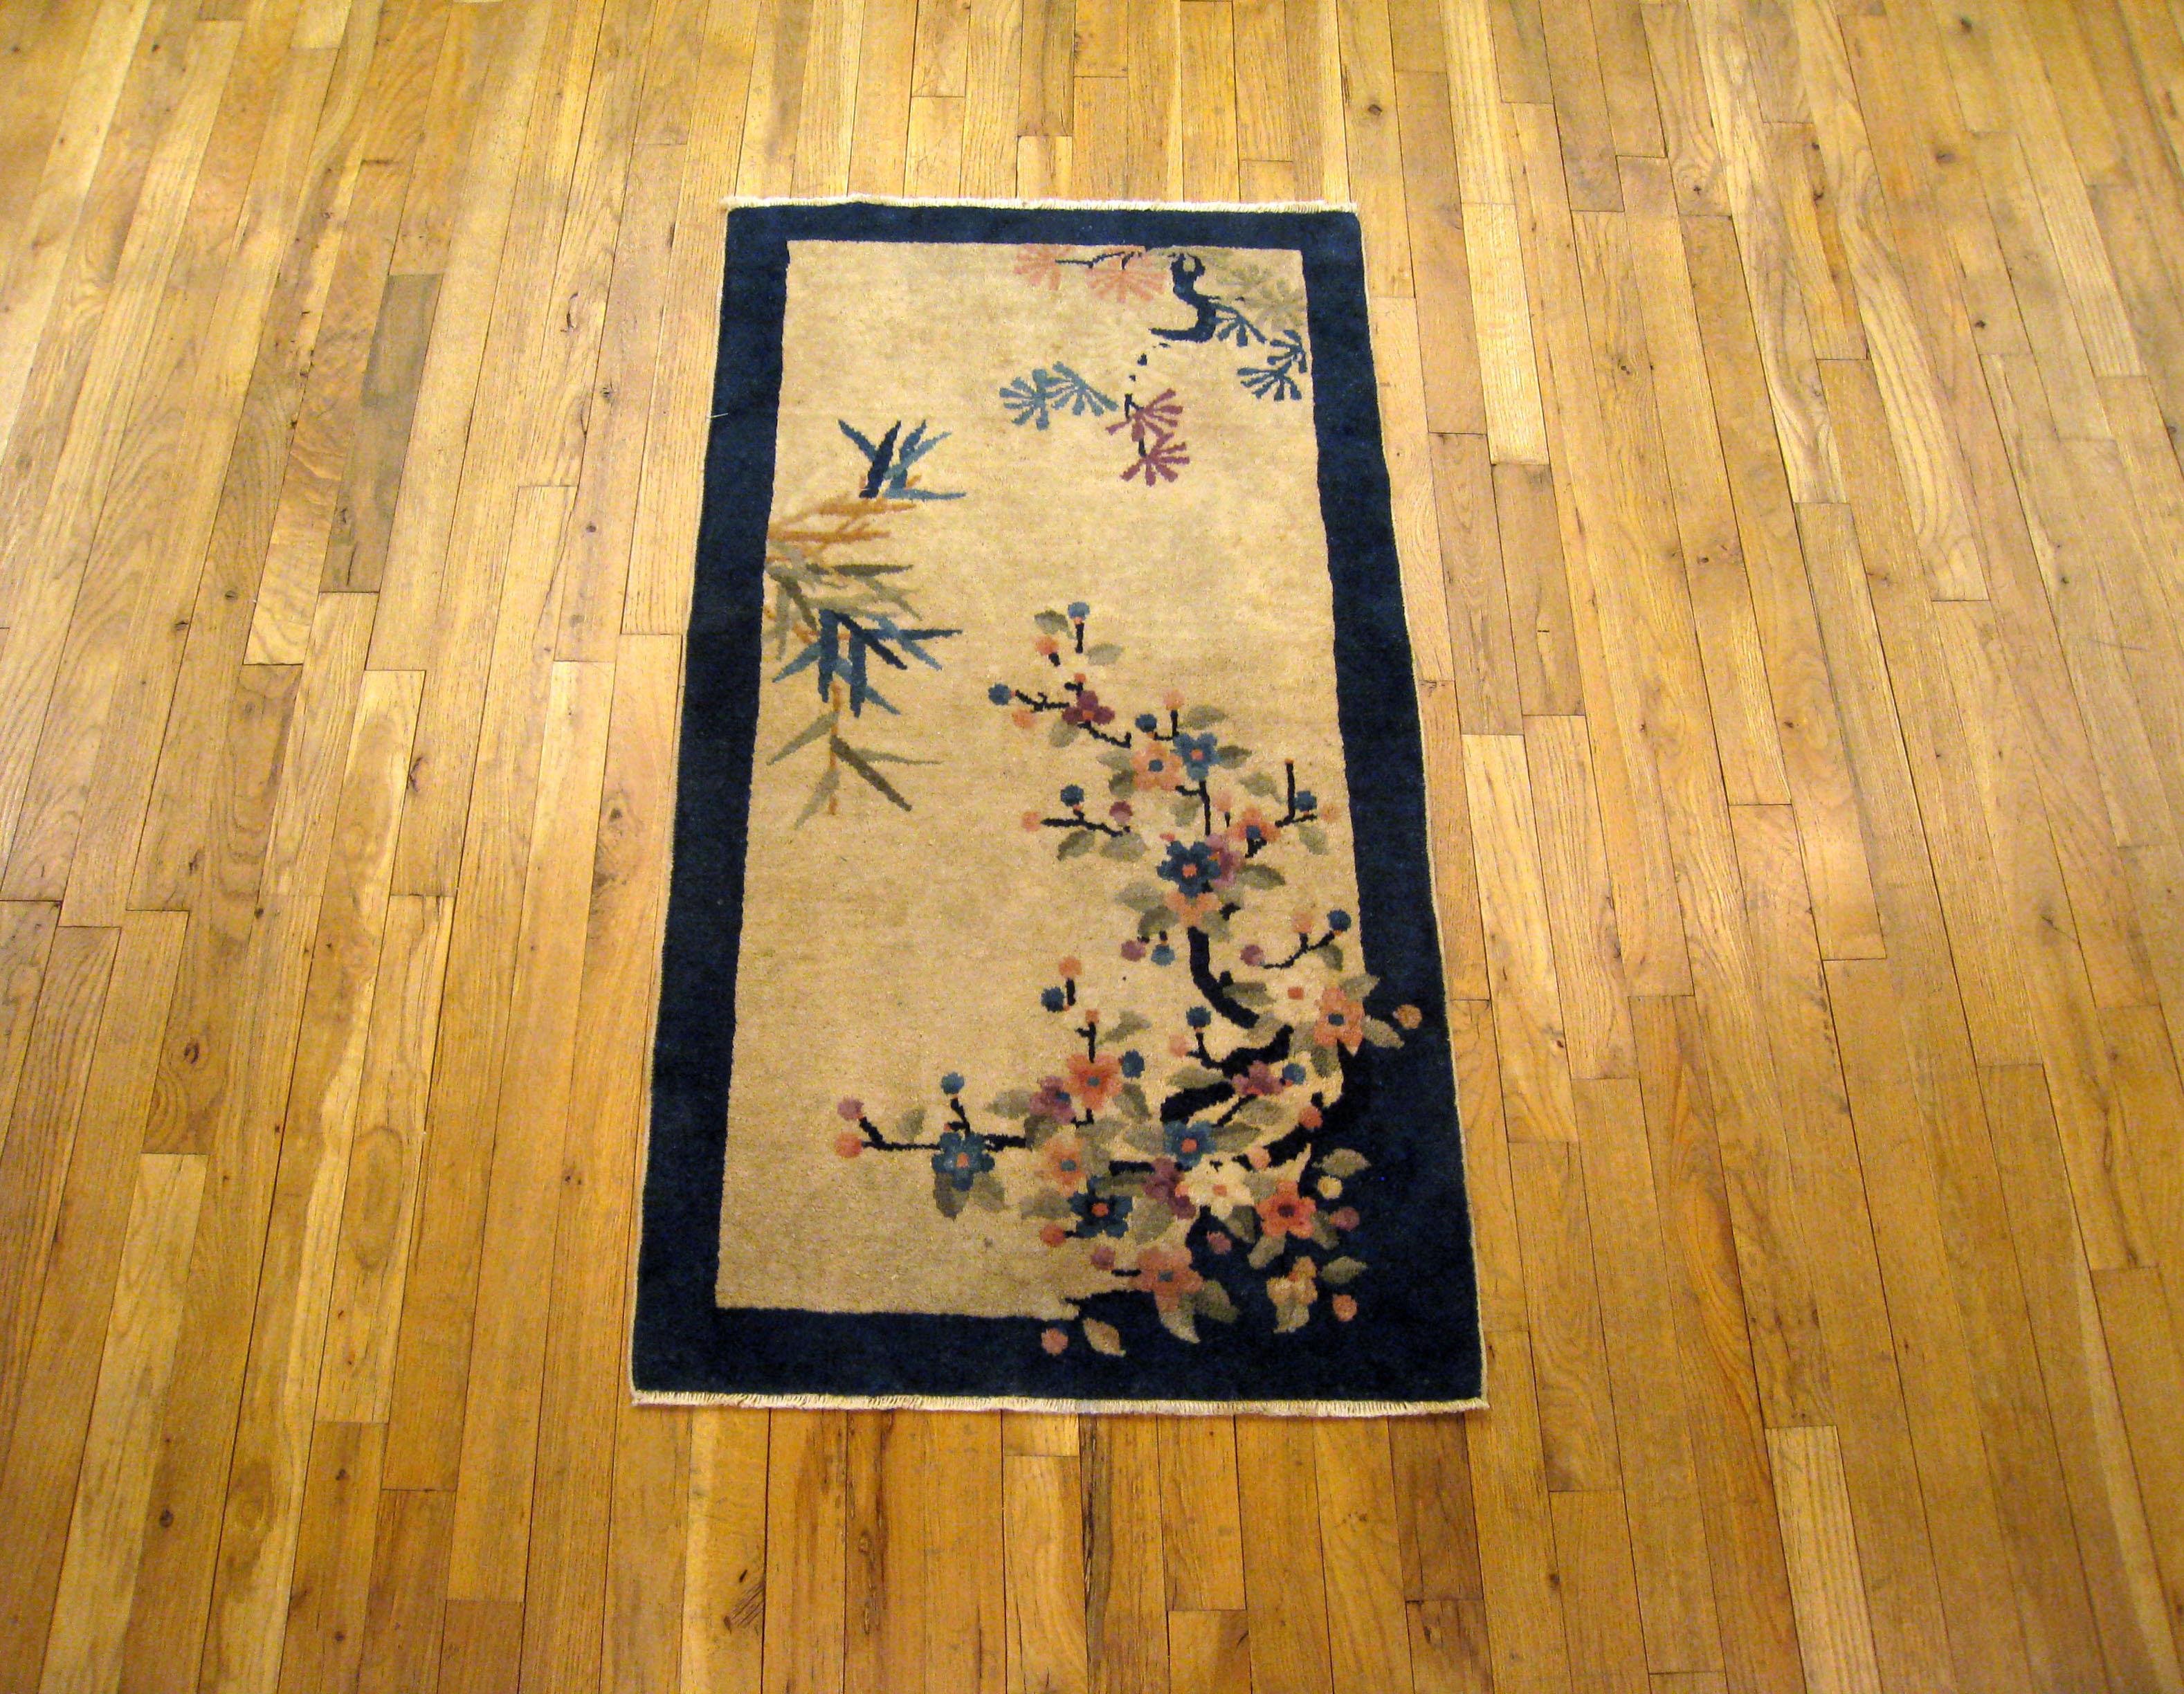 An antique Chinese Peking oriental rug, size 4'0 x 2'2, circa 1900. This lovely hand-knotted oriental carpet features an uncluttered central field characterized by decentralized flower and tree motifs on a soft background, enclosed within a navy